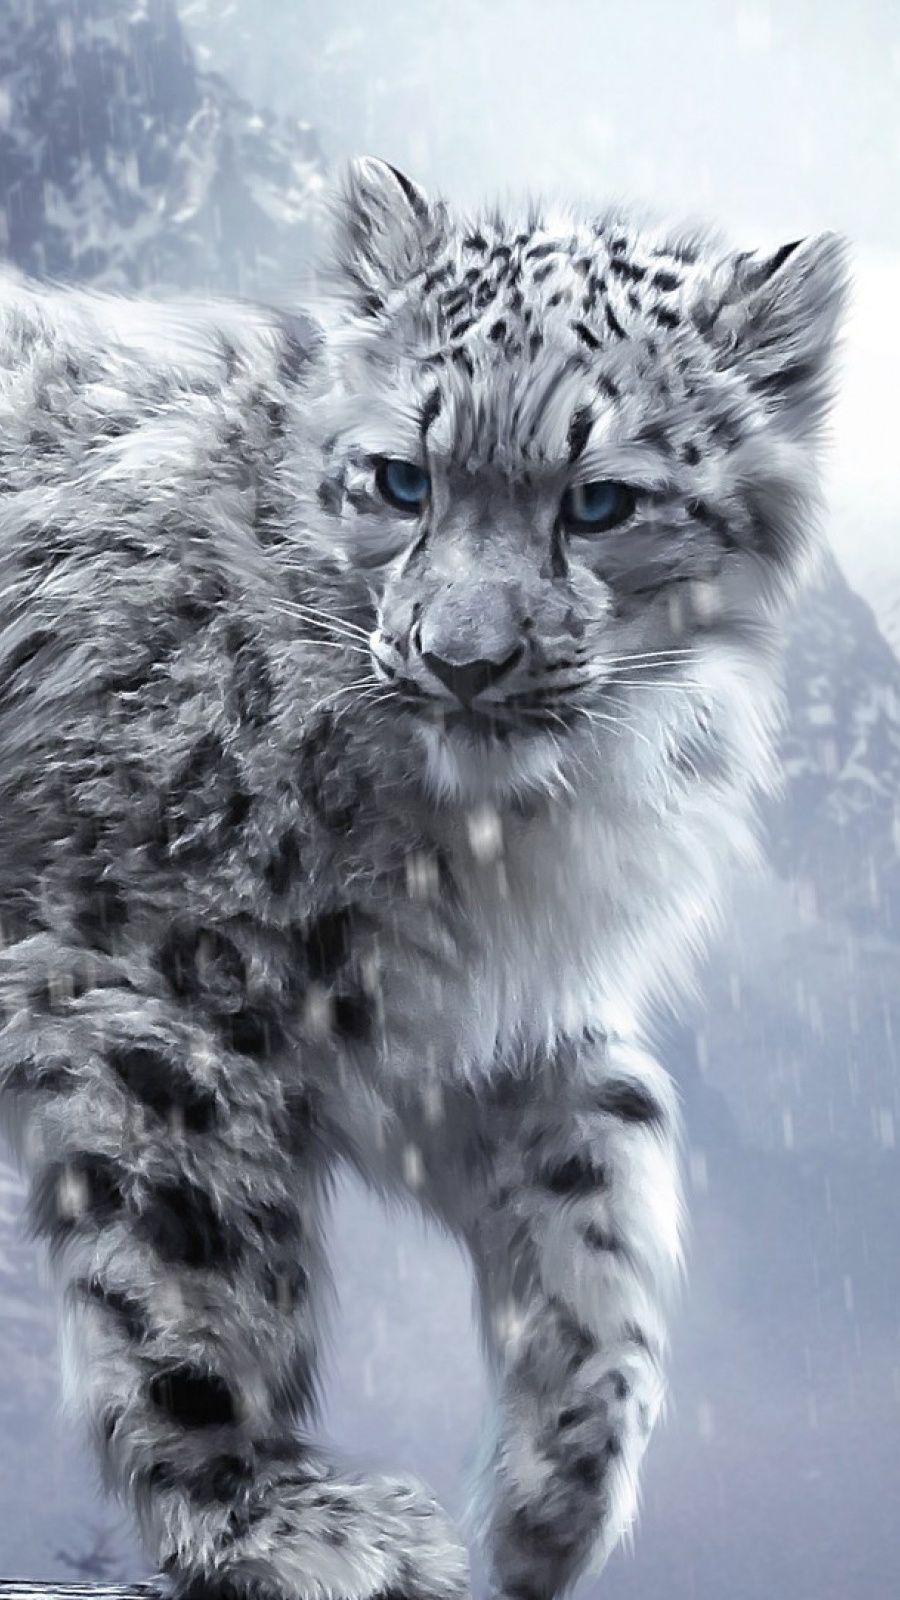 White Snow Leopards Mobile Wallpaper Wall. Cute animals